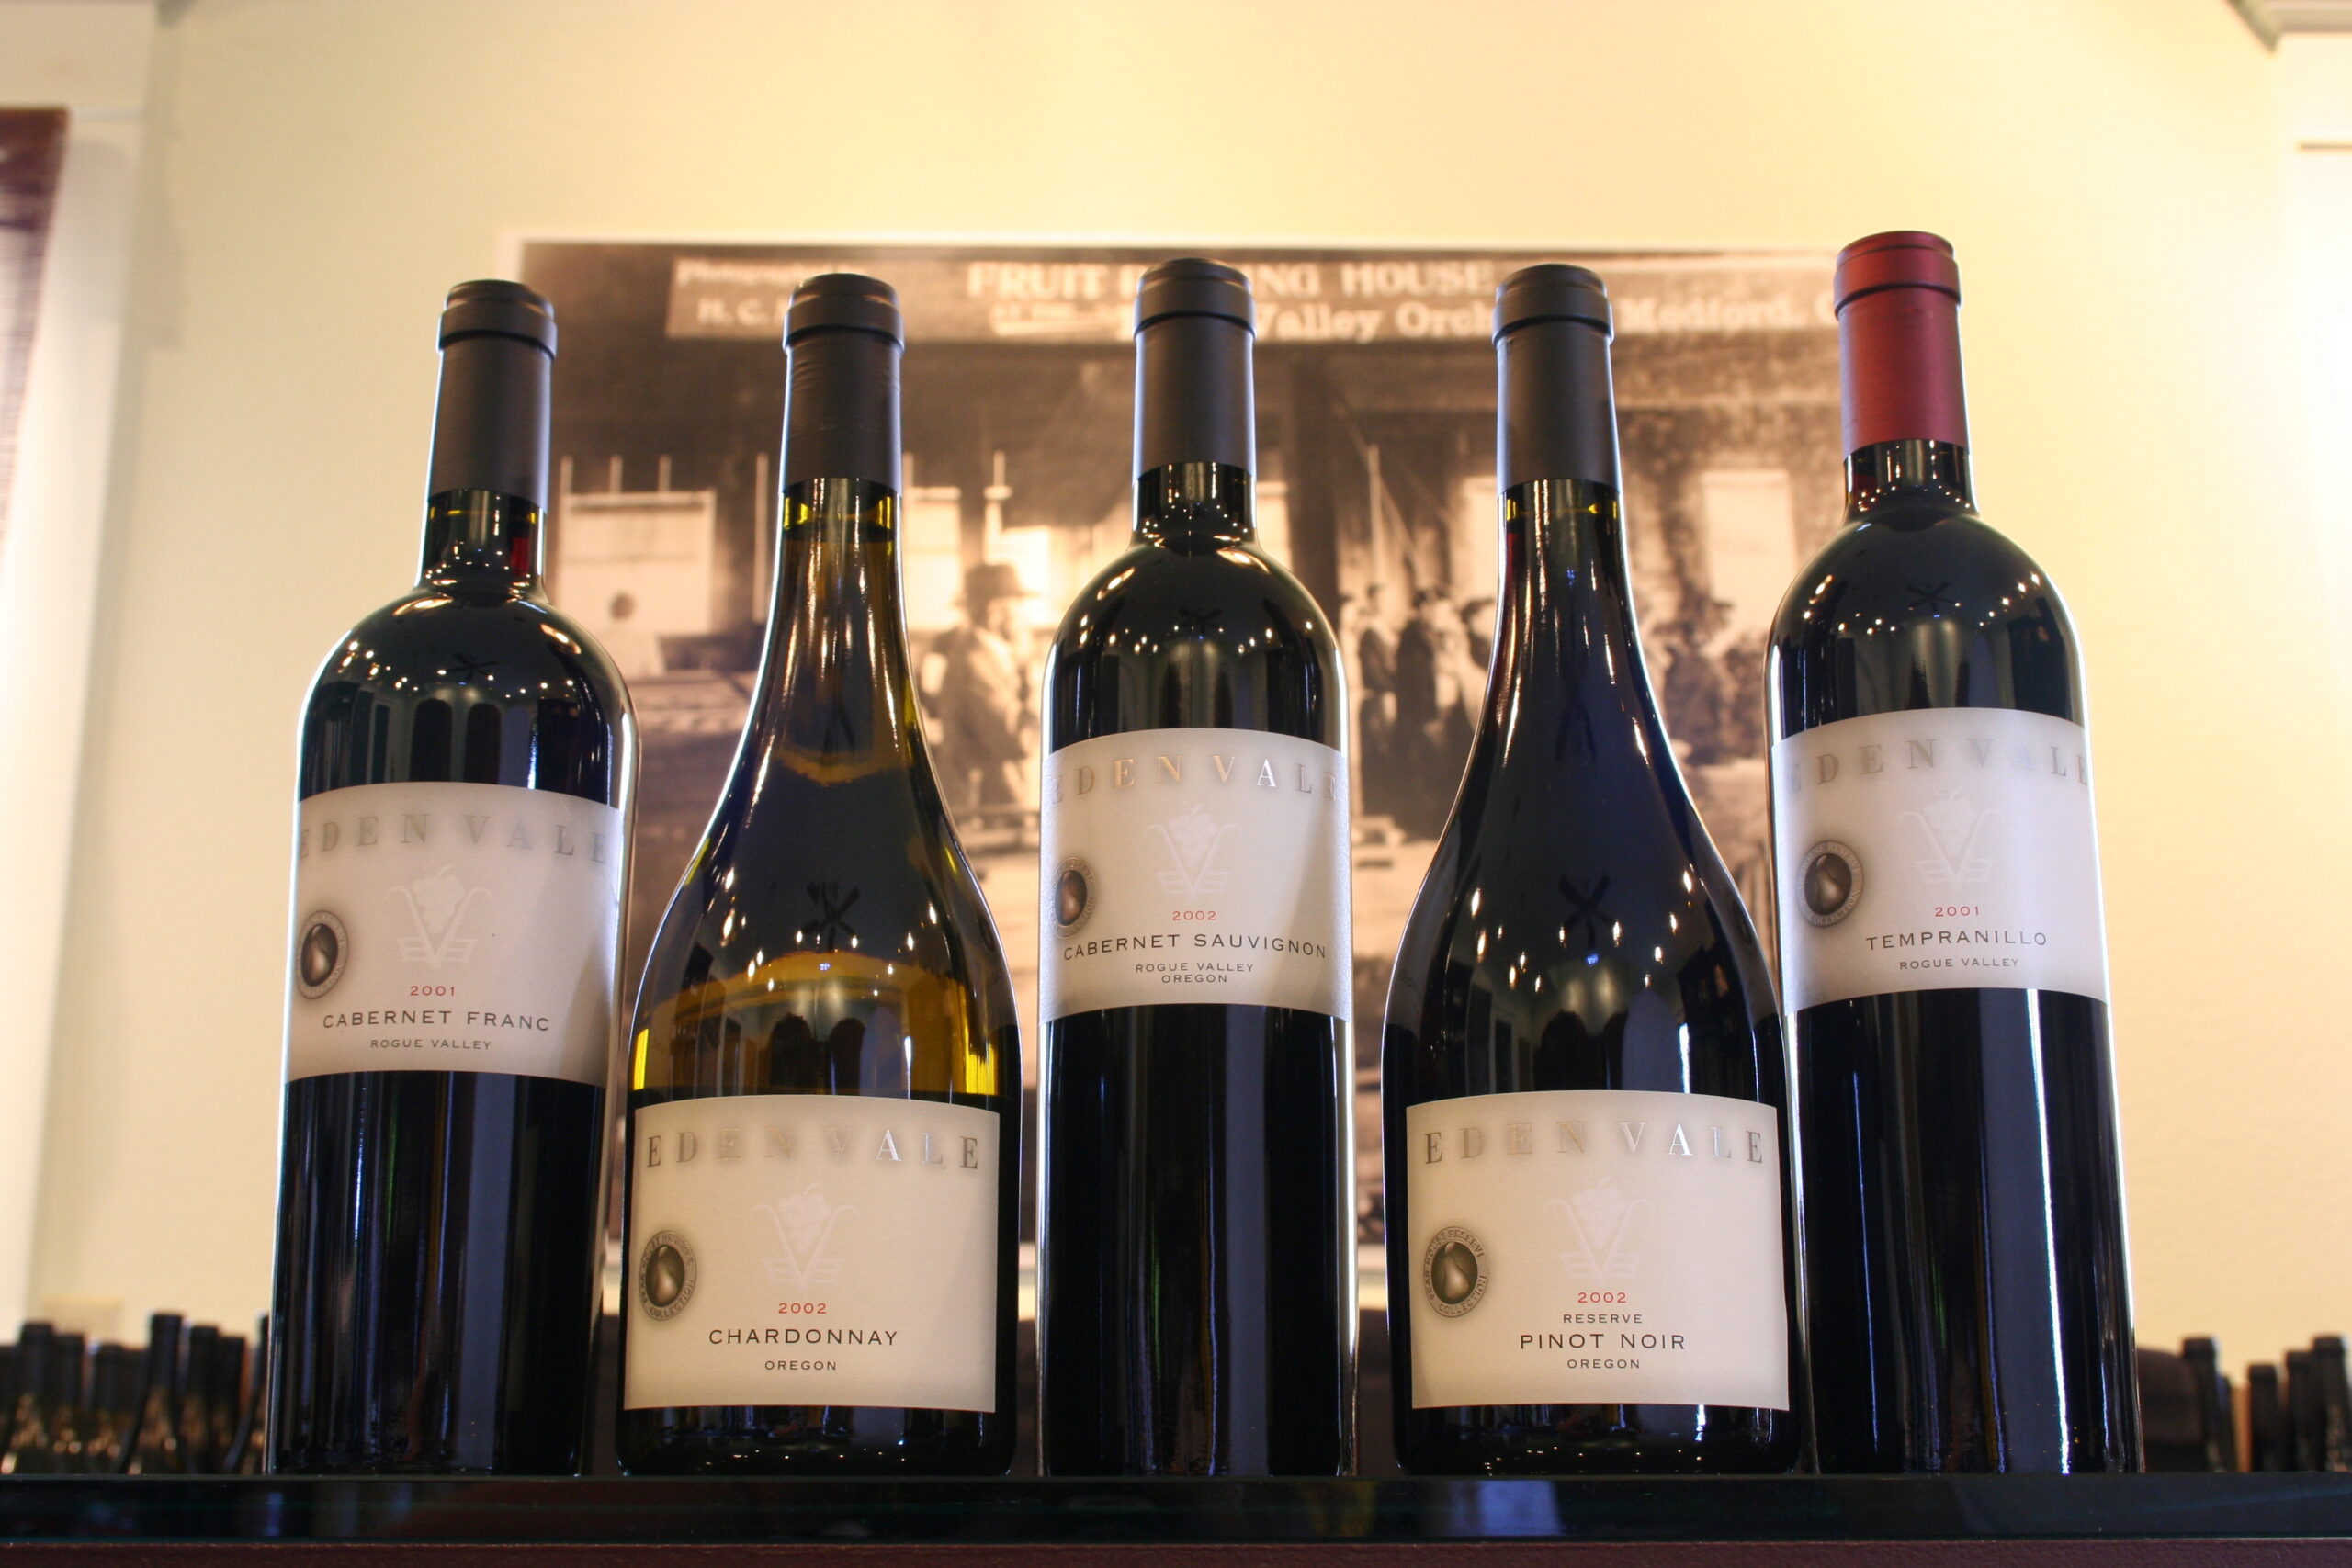 close-up image of five wine bottles with edenvale labels in front of a historic black and white photograph on the wall